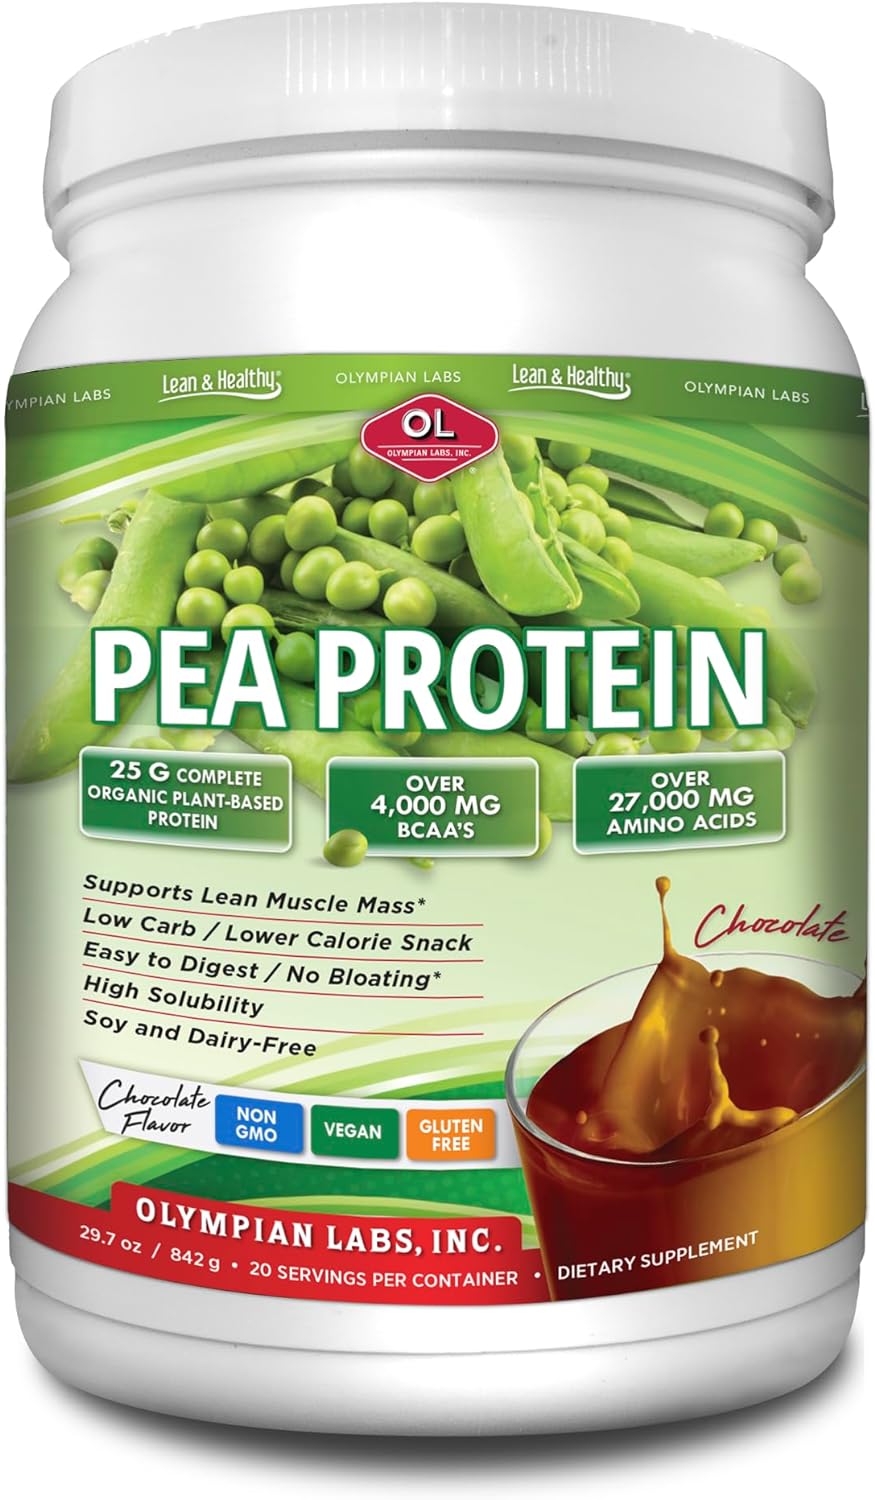 Olympian Labs Plant Based Pea Protein Powder, Chocolate - 25g of Prote